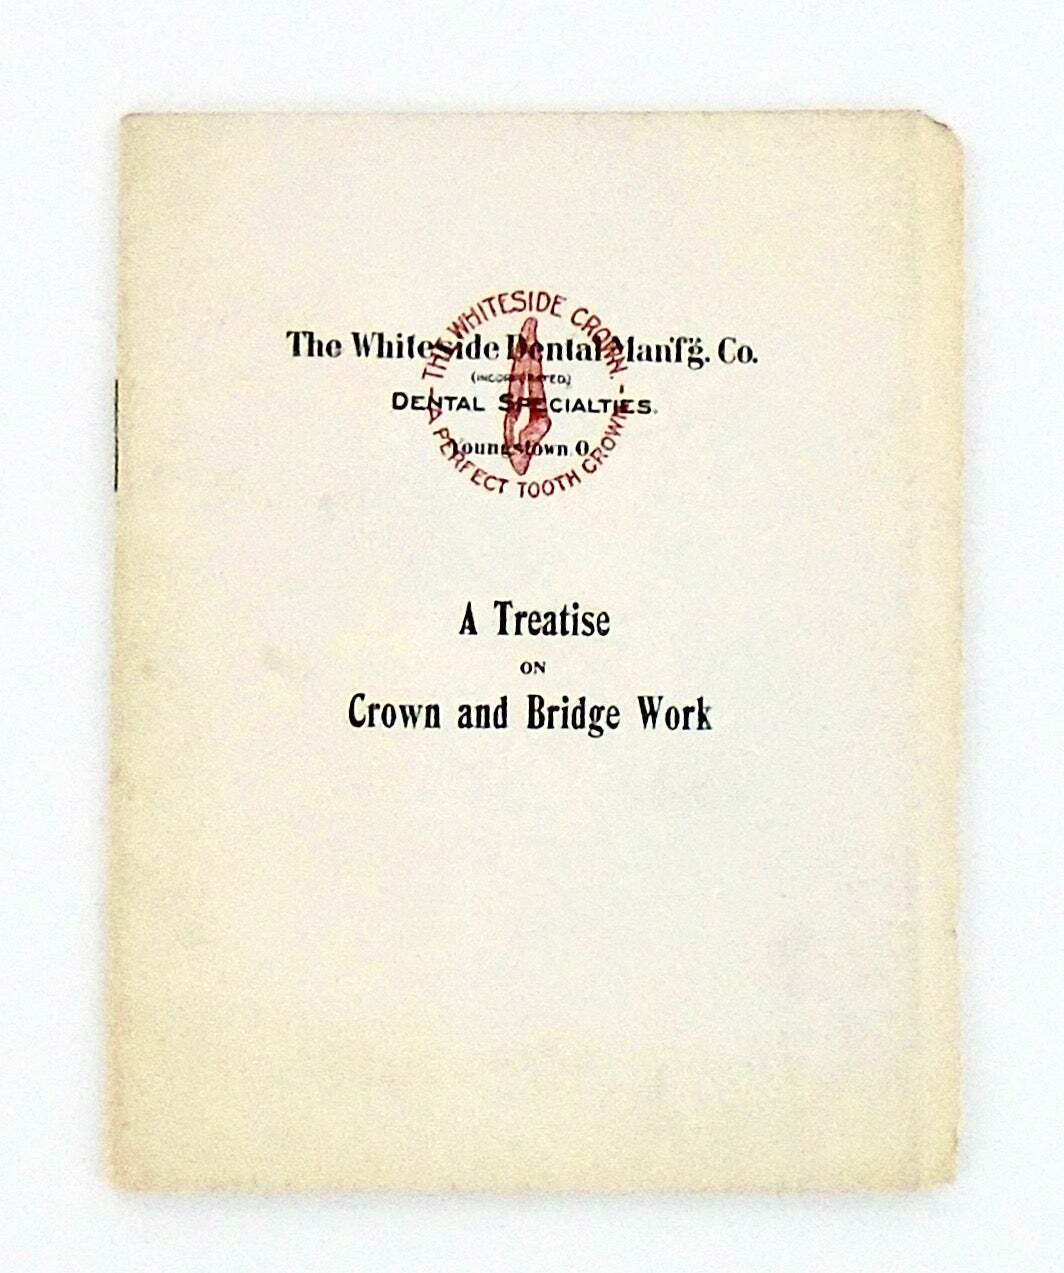 1904 / TRADE CATALOG A TREATISE ON CROWN AND BRIDGE WORK / 1st Edition